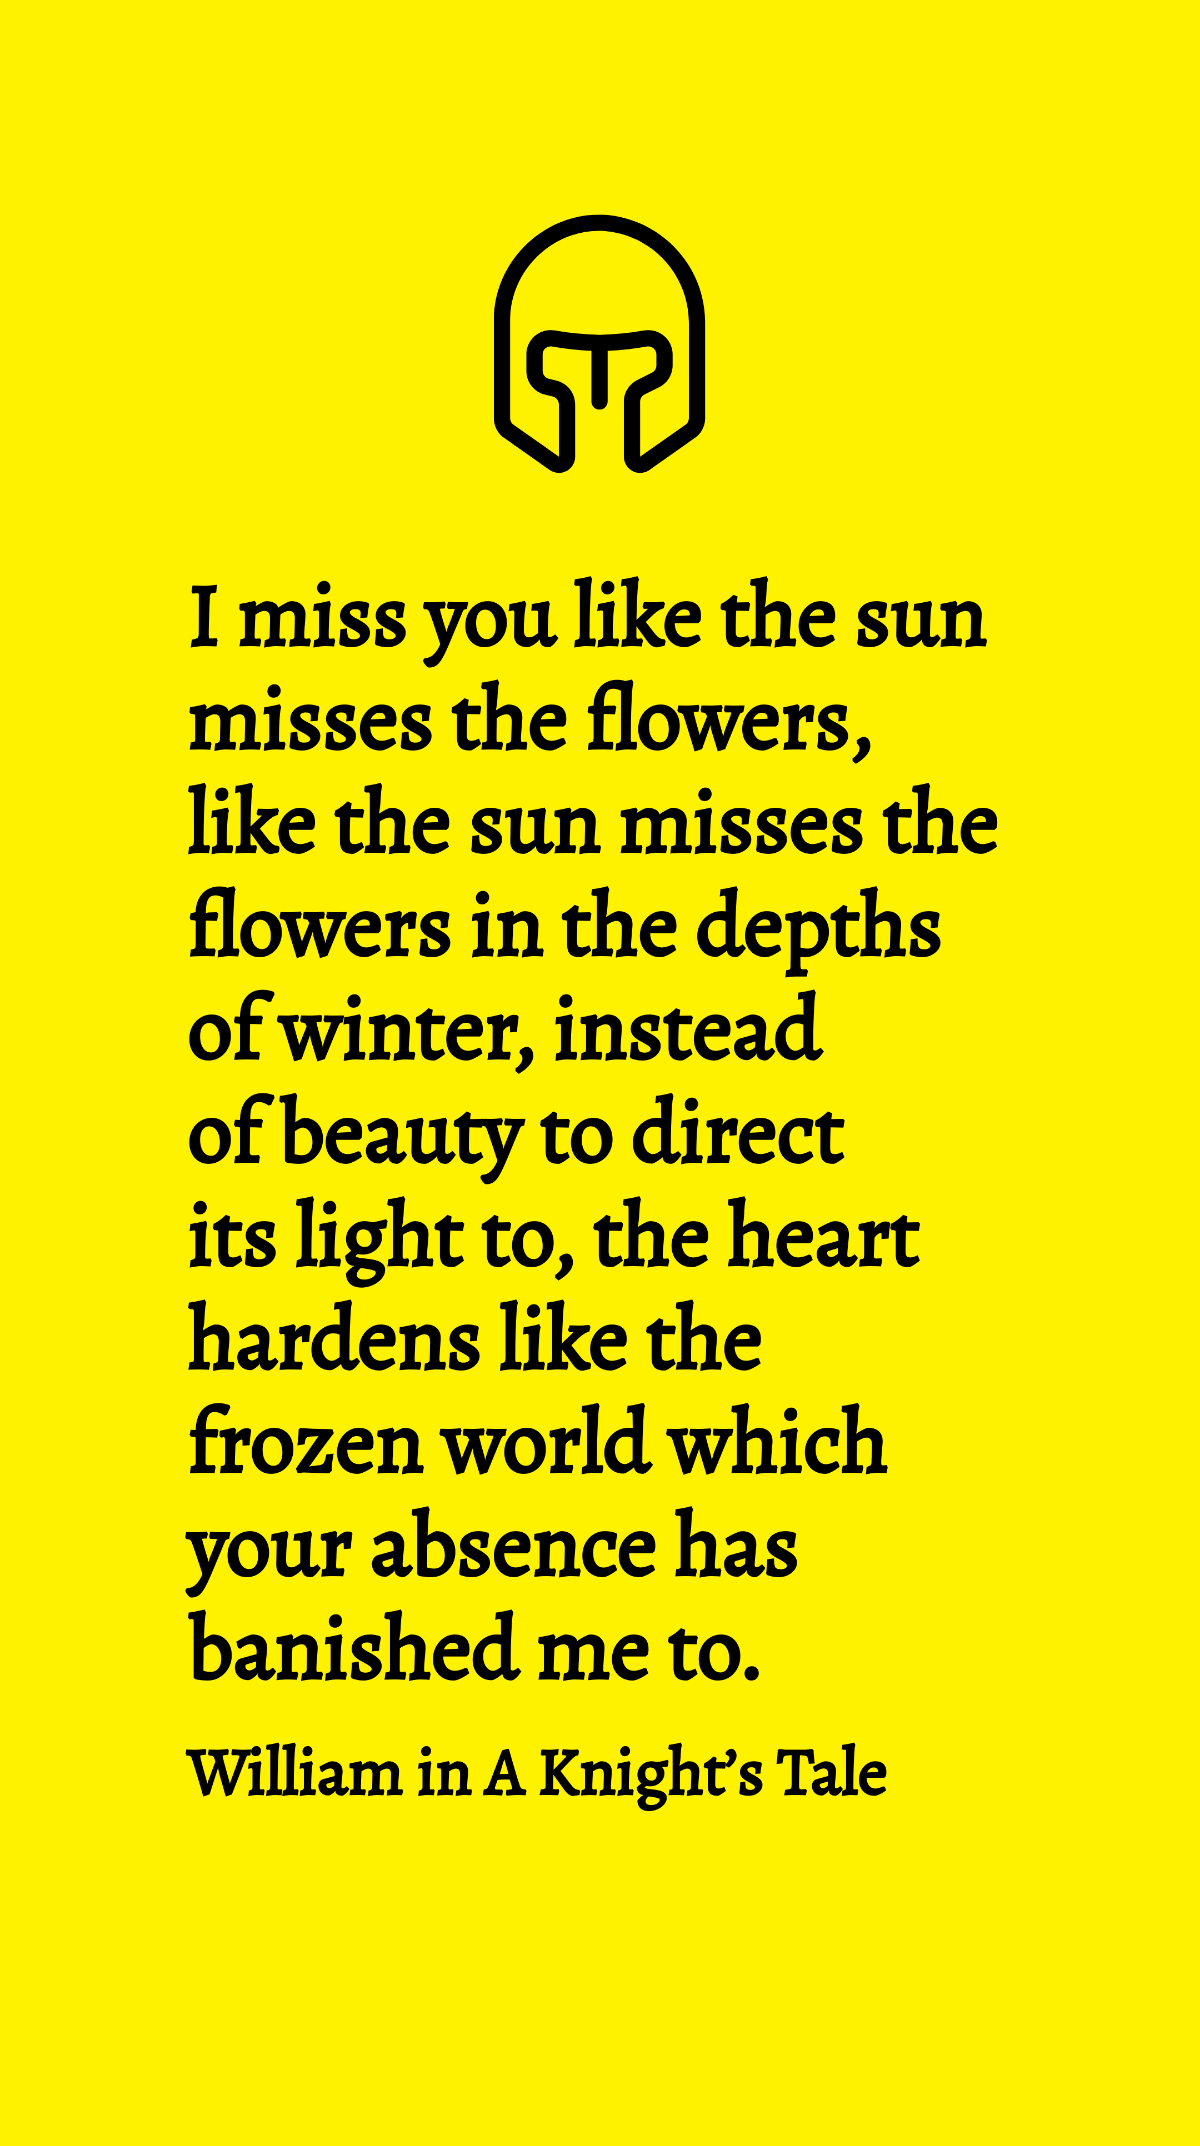 William in A Knight’s Tale - I miss you like the sun misses the flowers, like the sun misses the flowers in the depths of winter, instead of beauty to direct its light to, the heart hardens like the f